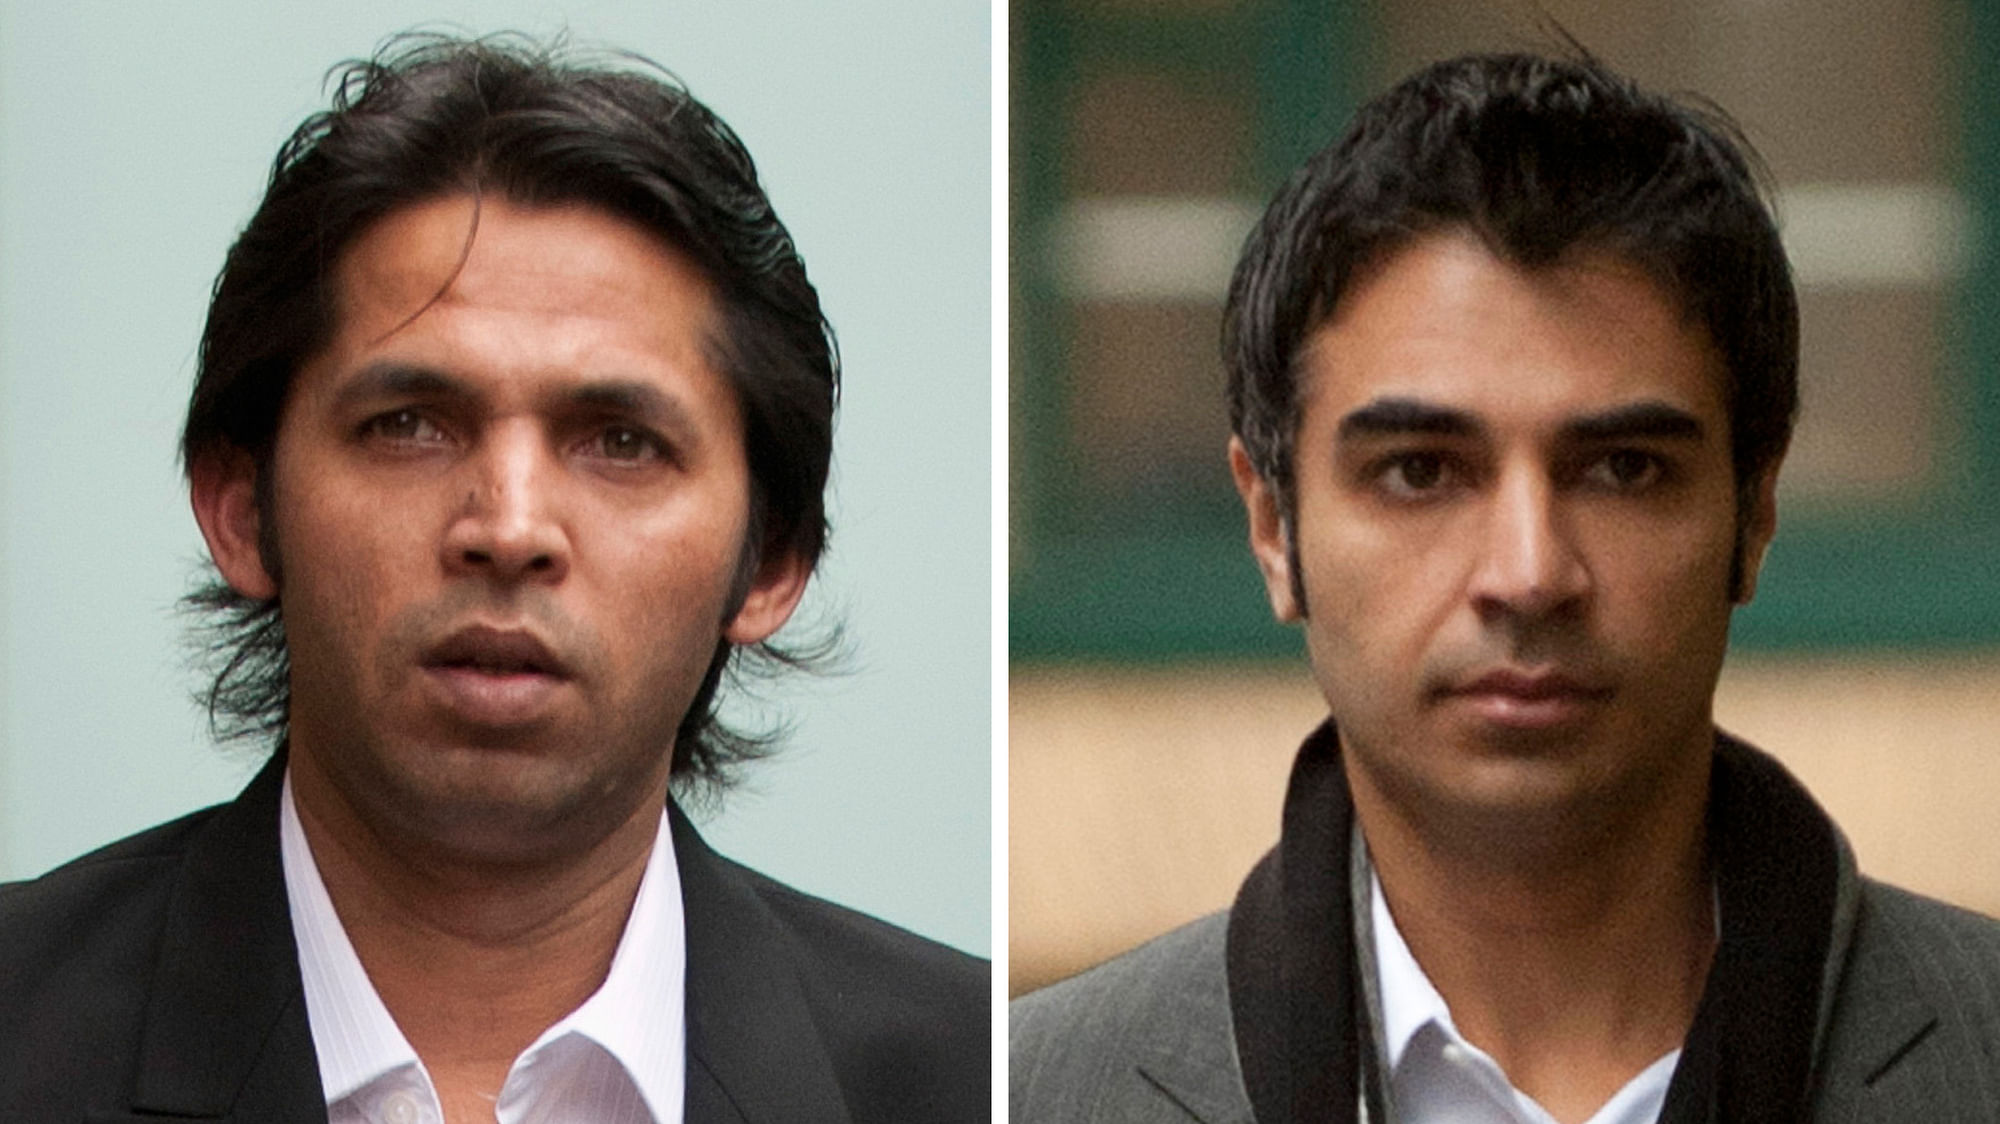 Former Pakistan cricketer Mohammad Asif and former Pakistan cricket captain Salman Butt (R) arriving at Southwark Crown Court in London. (Photo: Reuters)